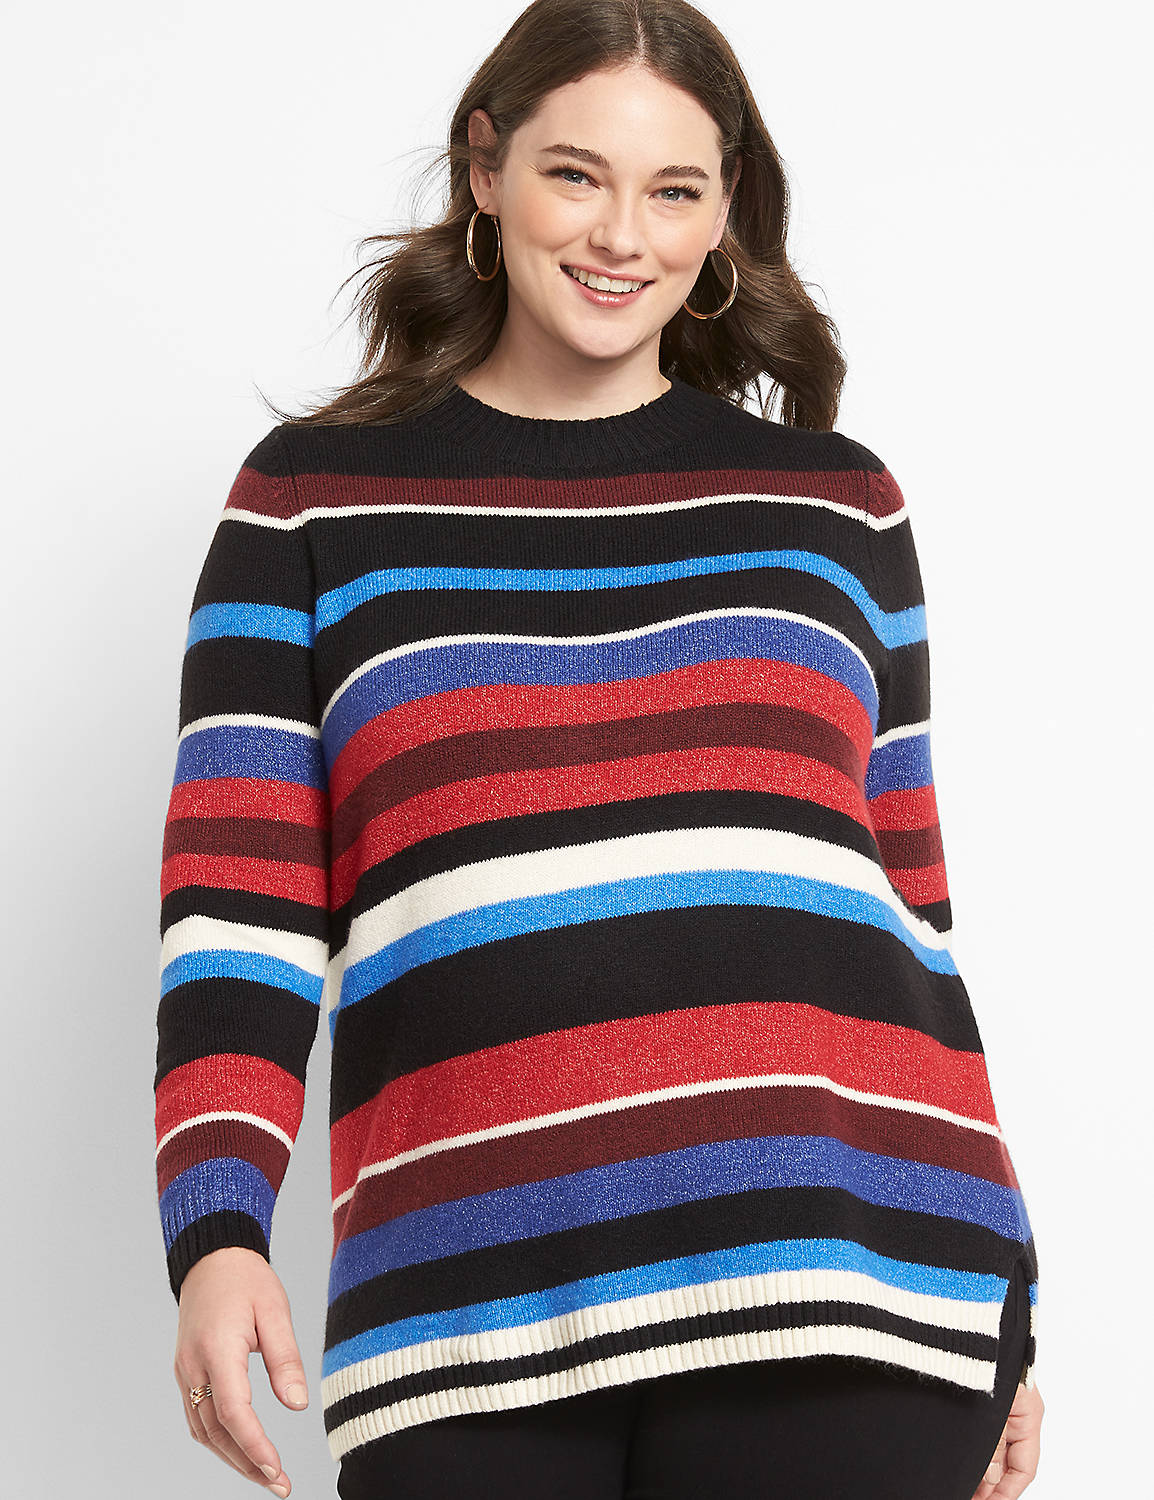 Crew-Neck Striped Sweater Product Image 1